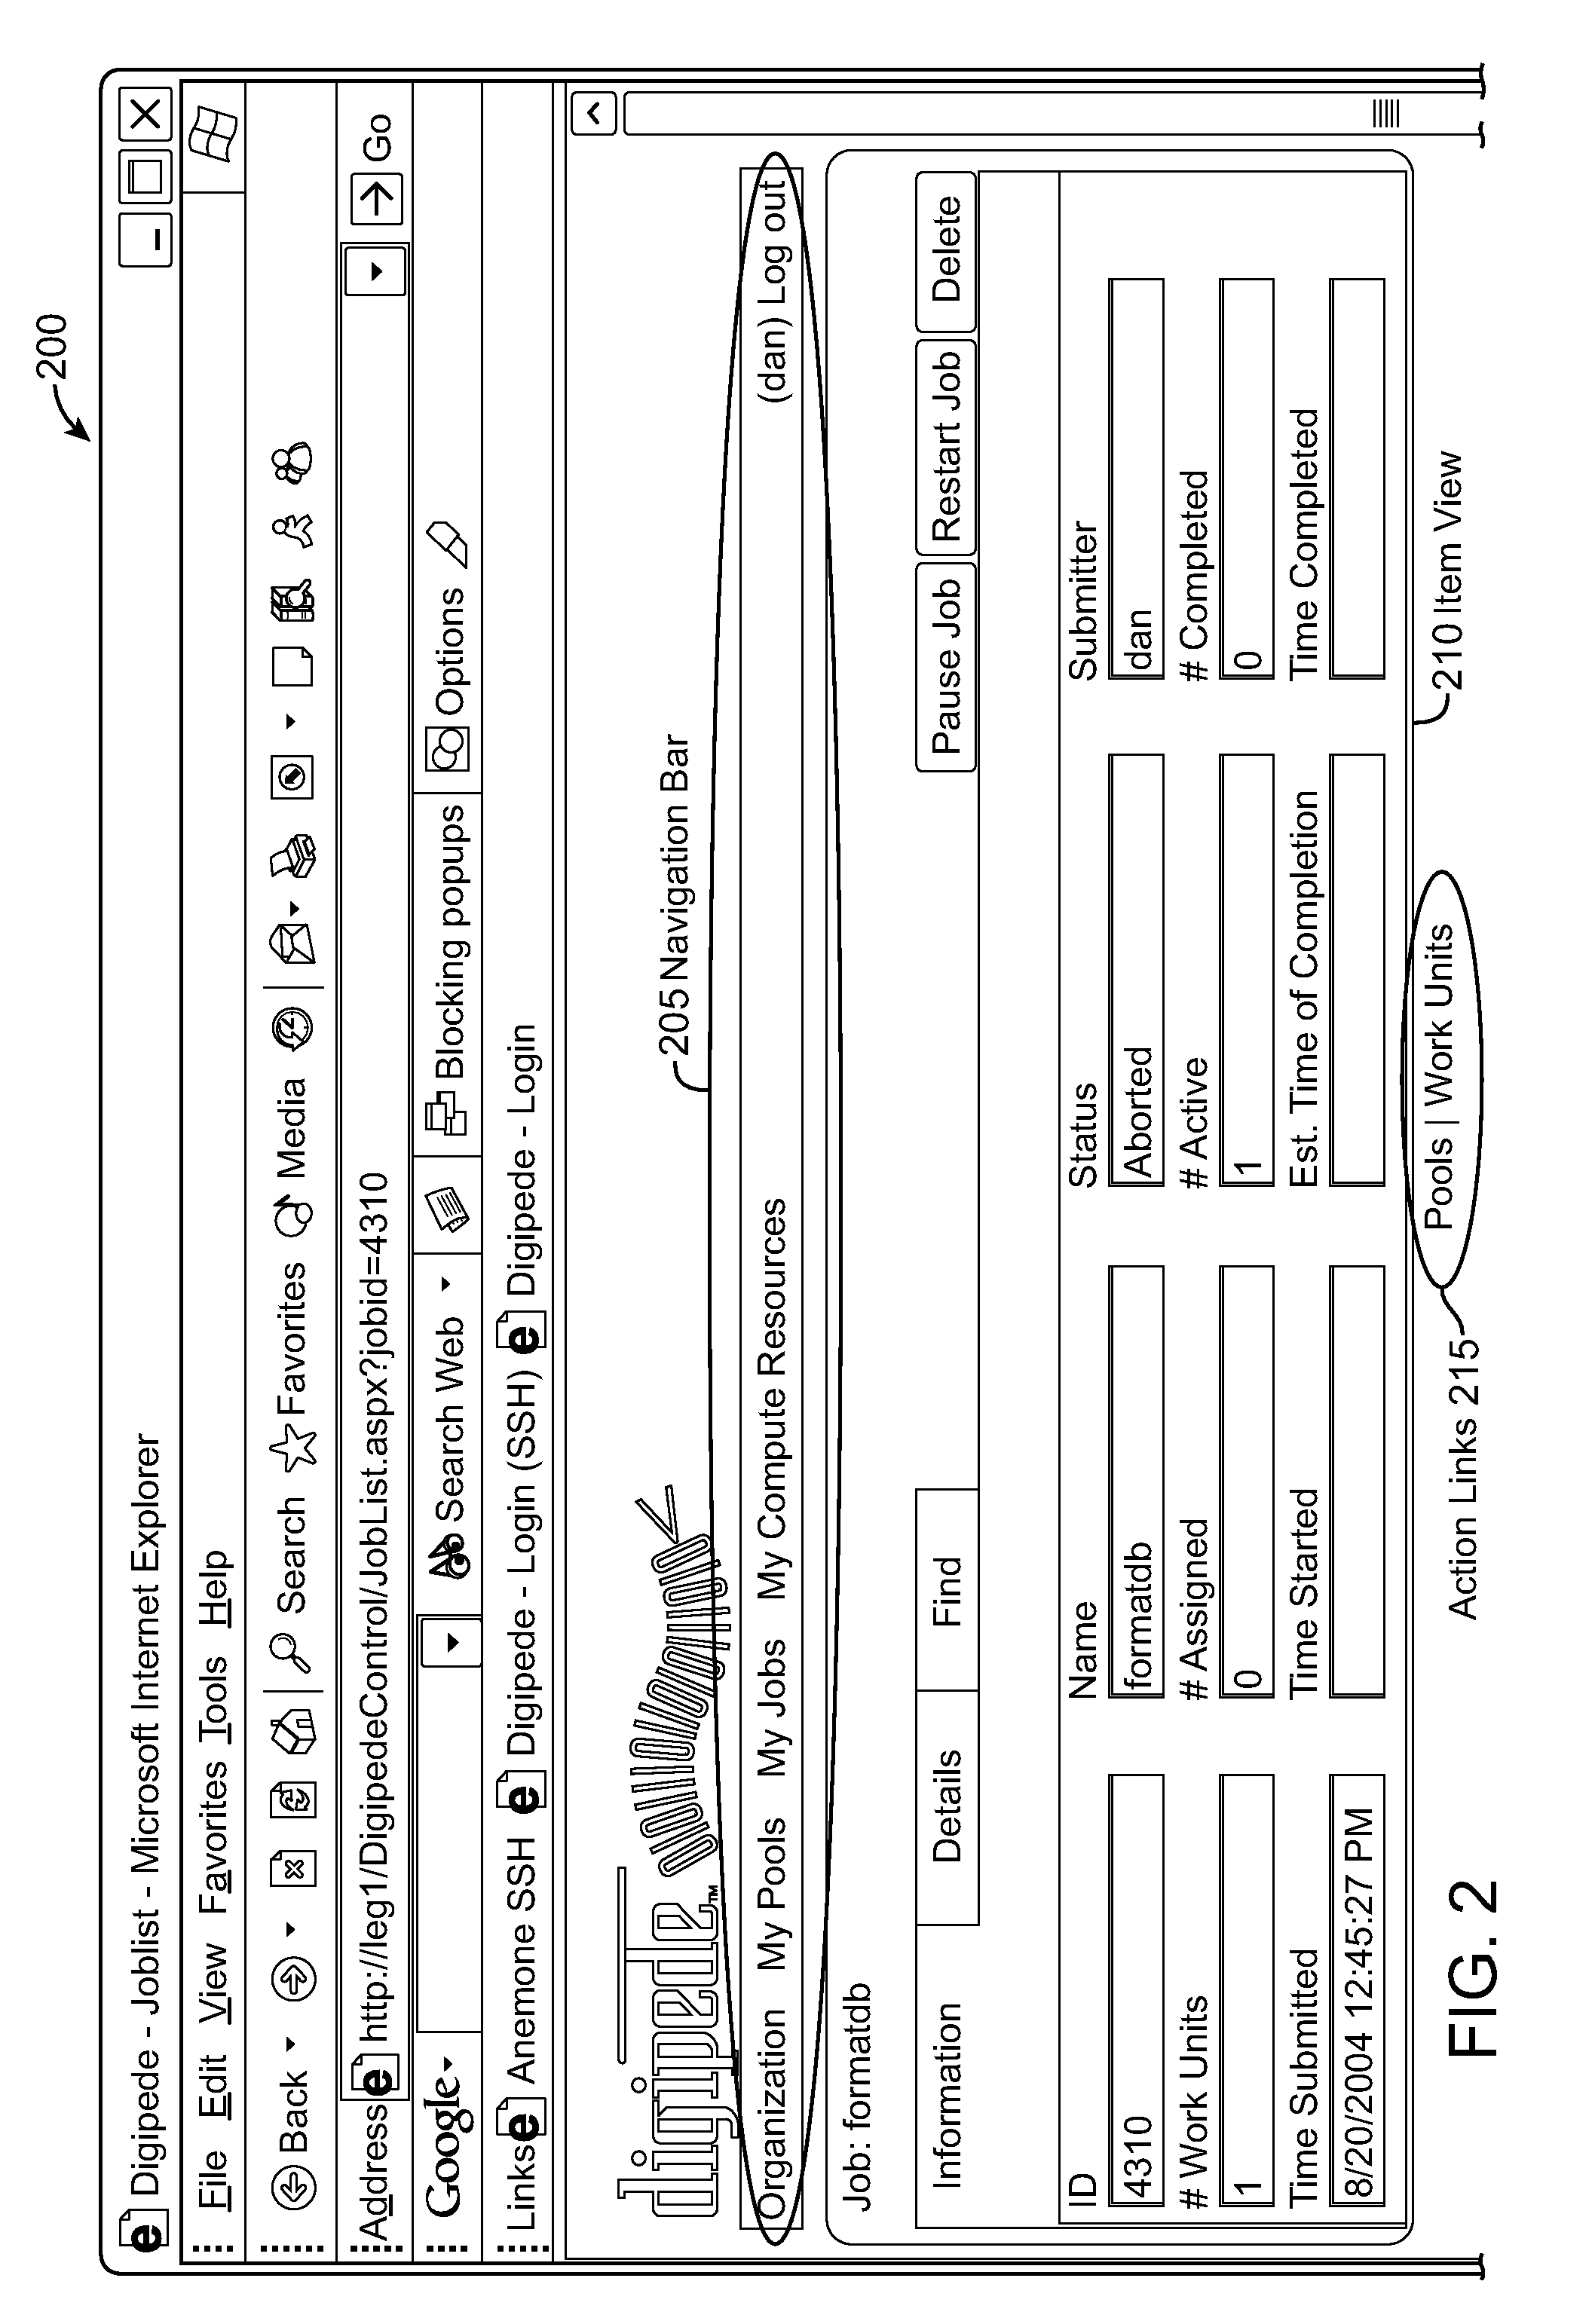 Multicore Distributed Processing System